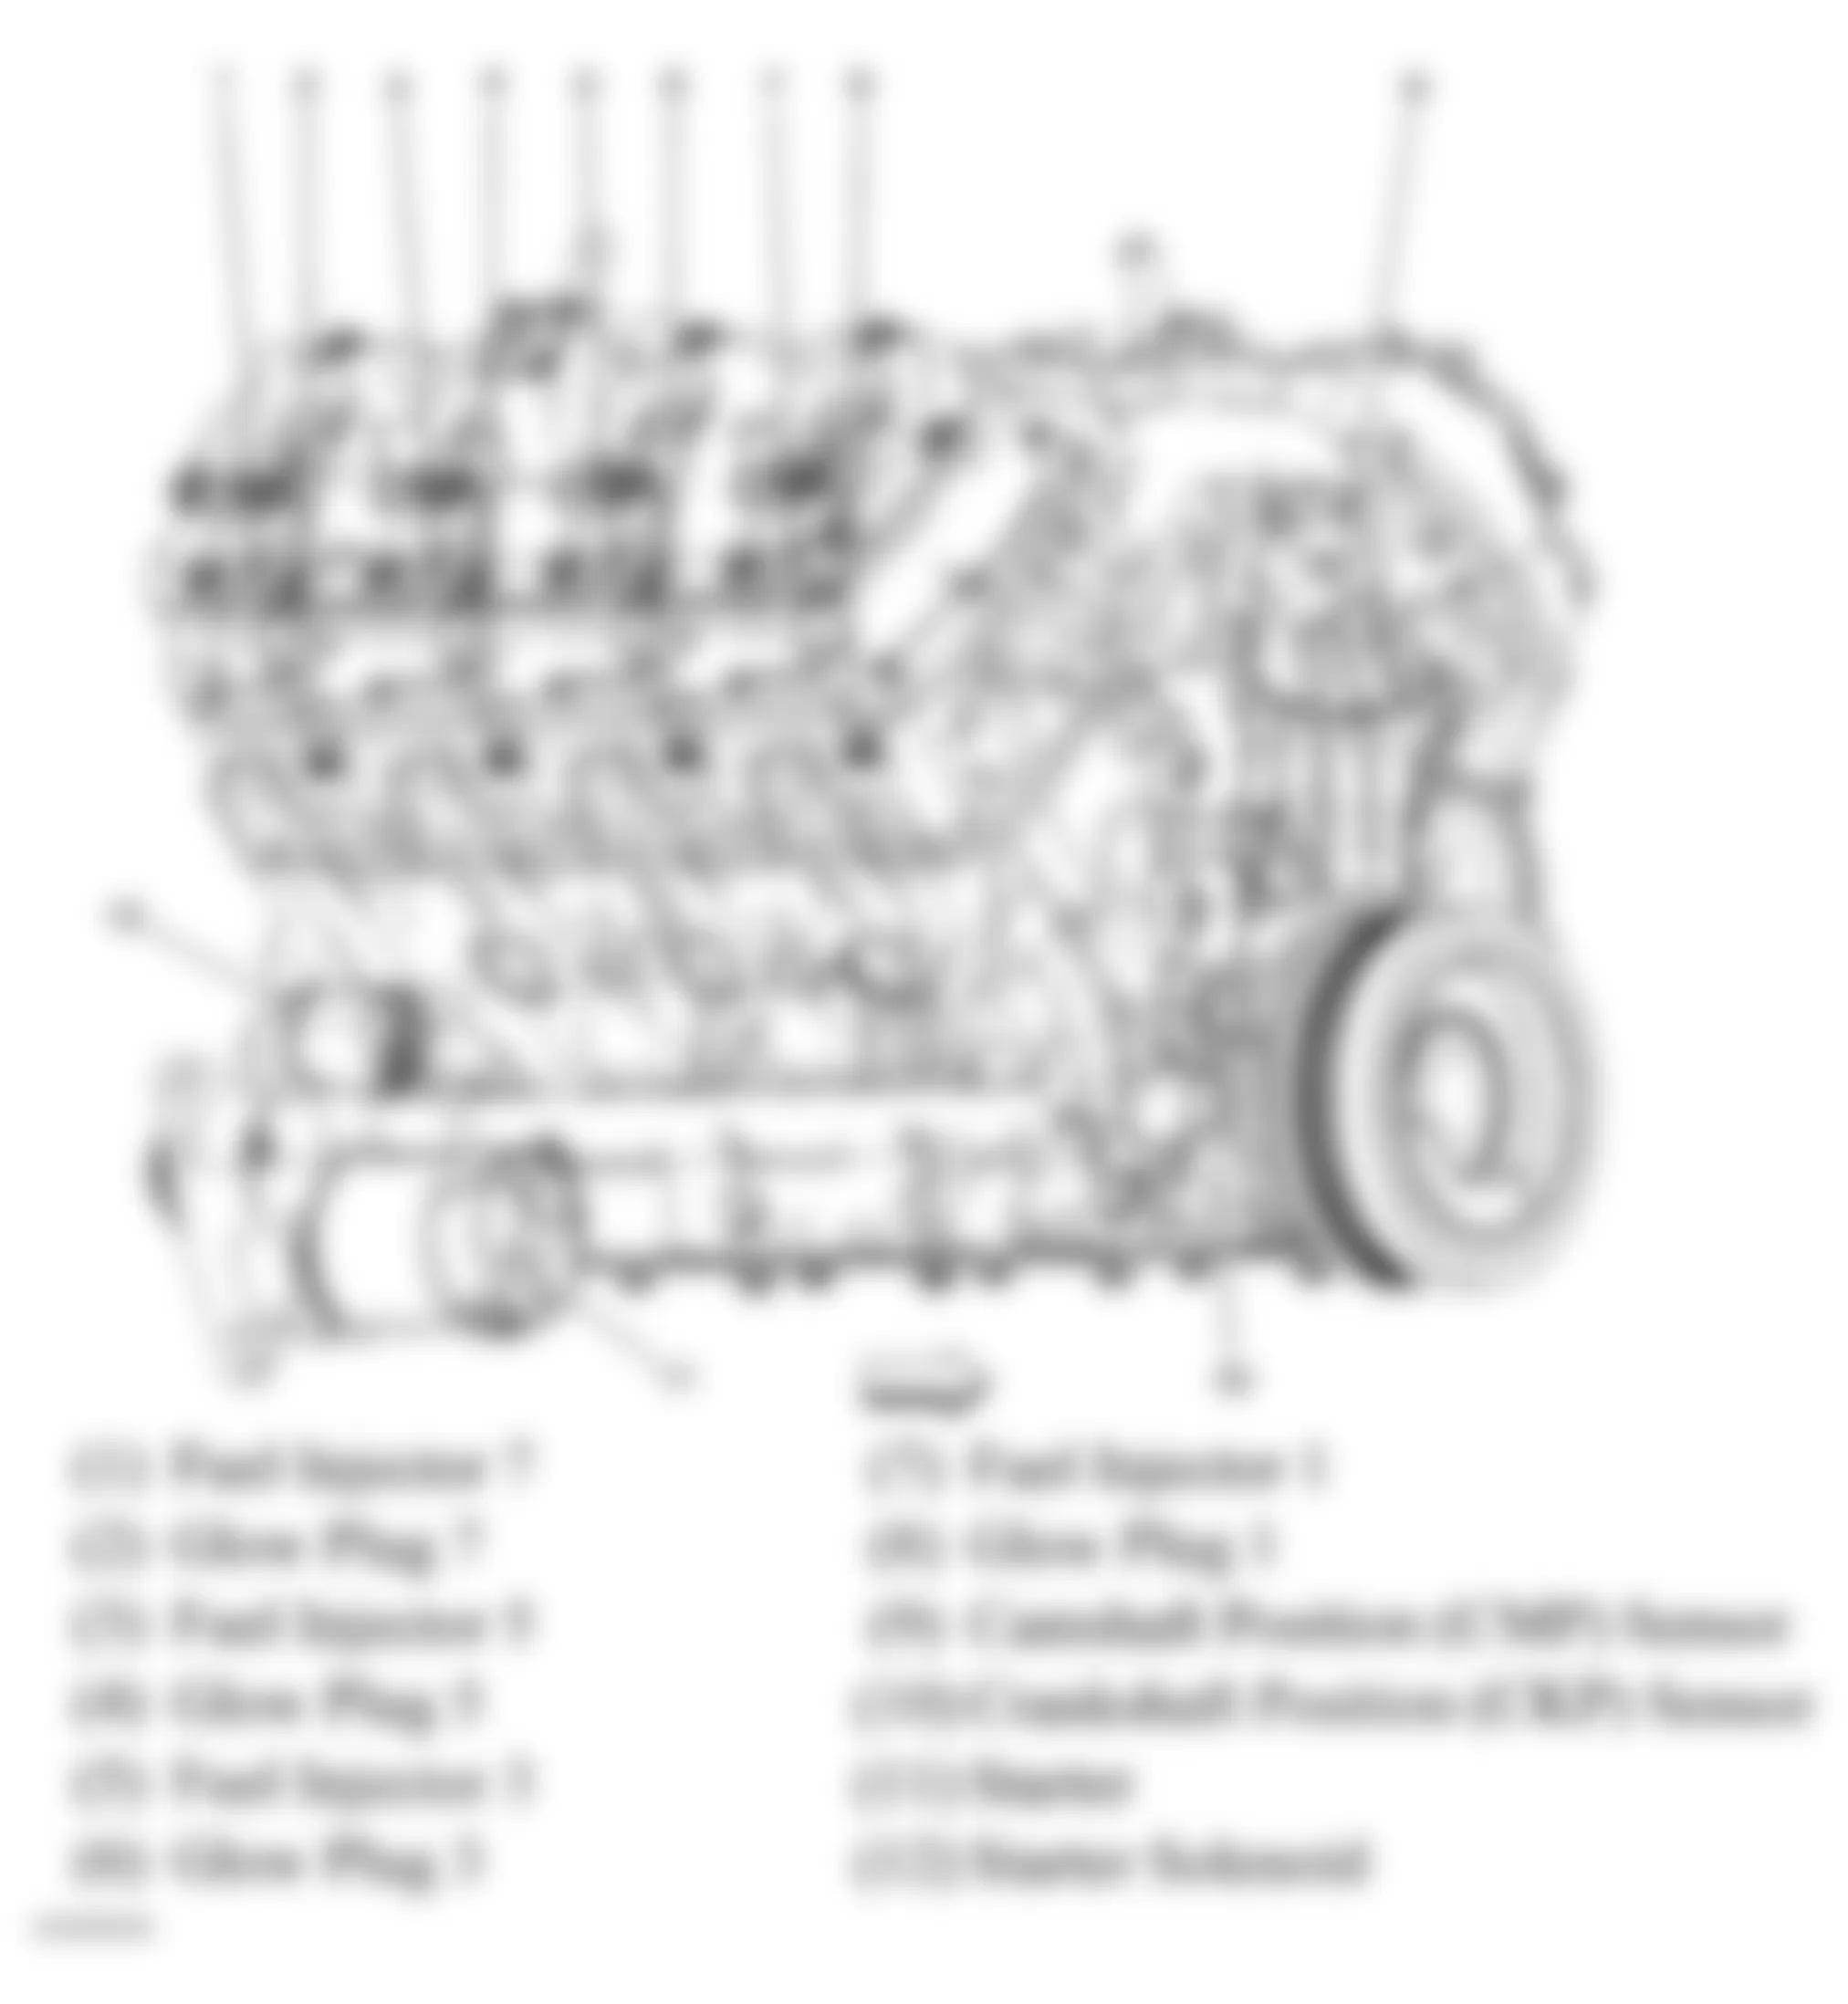 GMC Savana H1500 2008 - Component Locations -  Right Side Of Engine (6.6L)